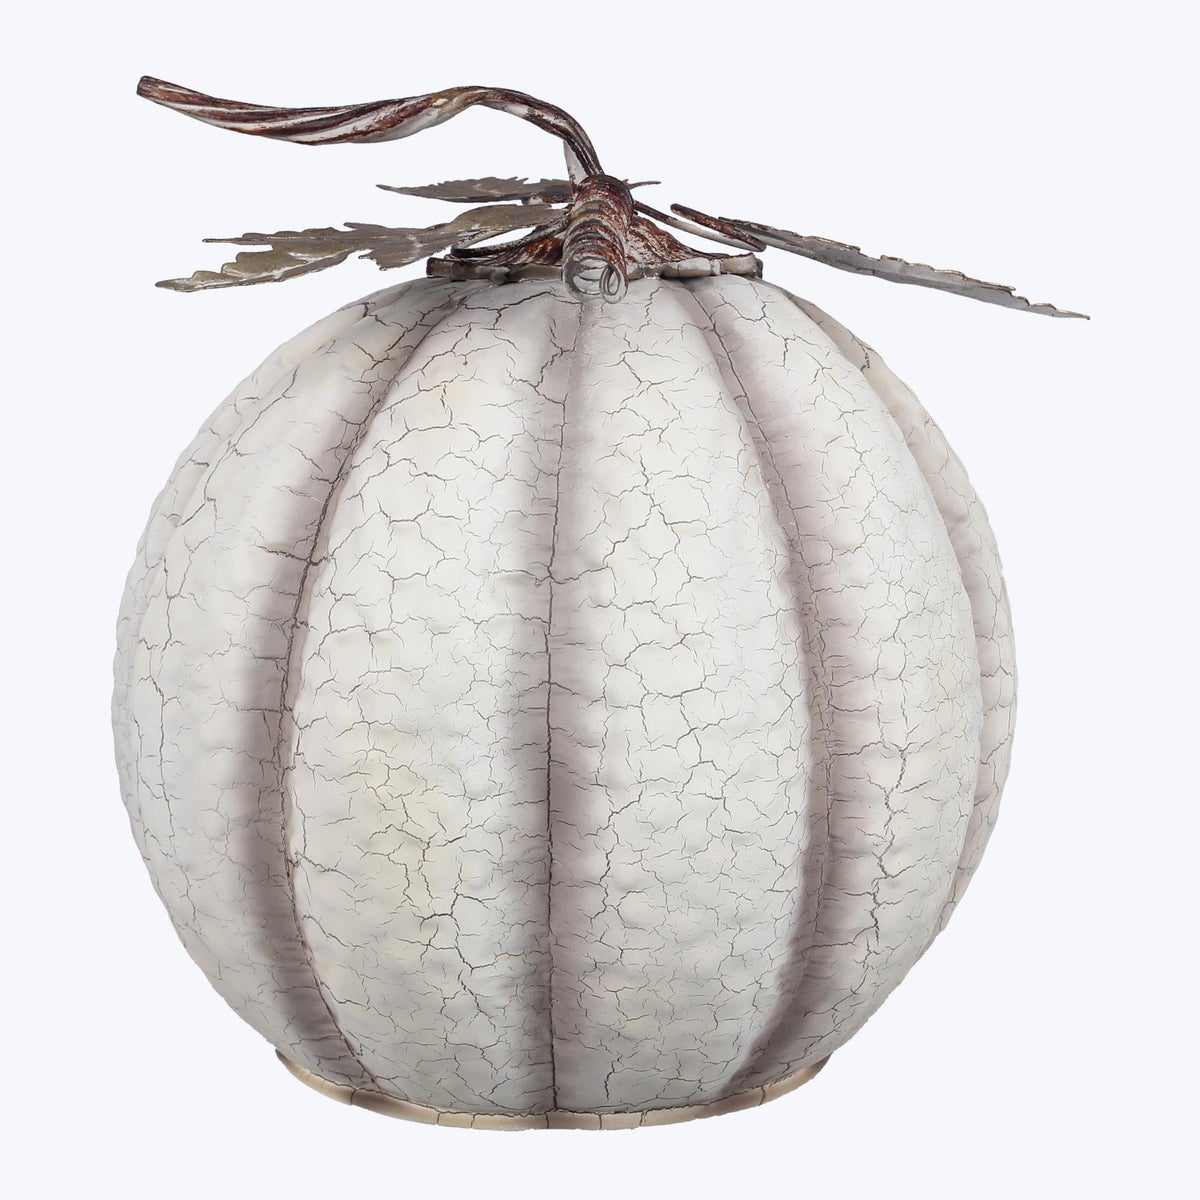 Tabletop White Crackled Speckled Pumpkin with Metal leaves